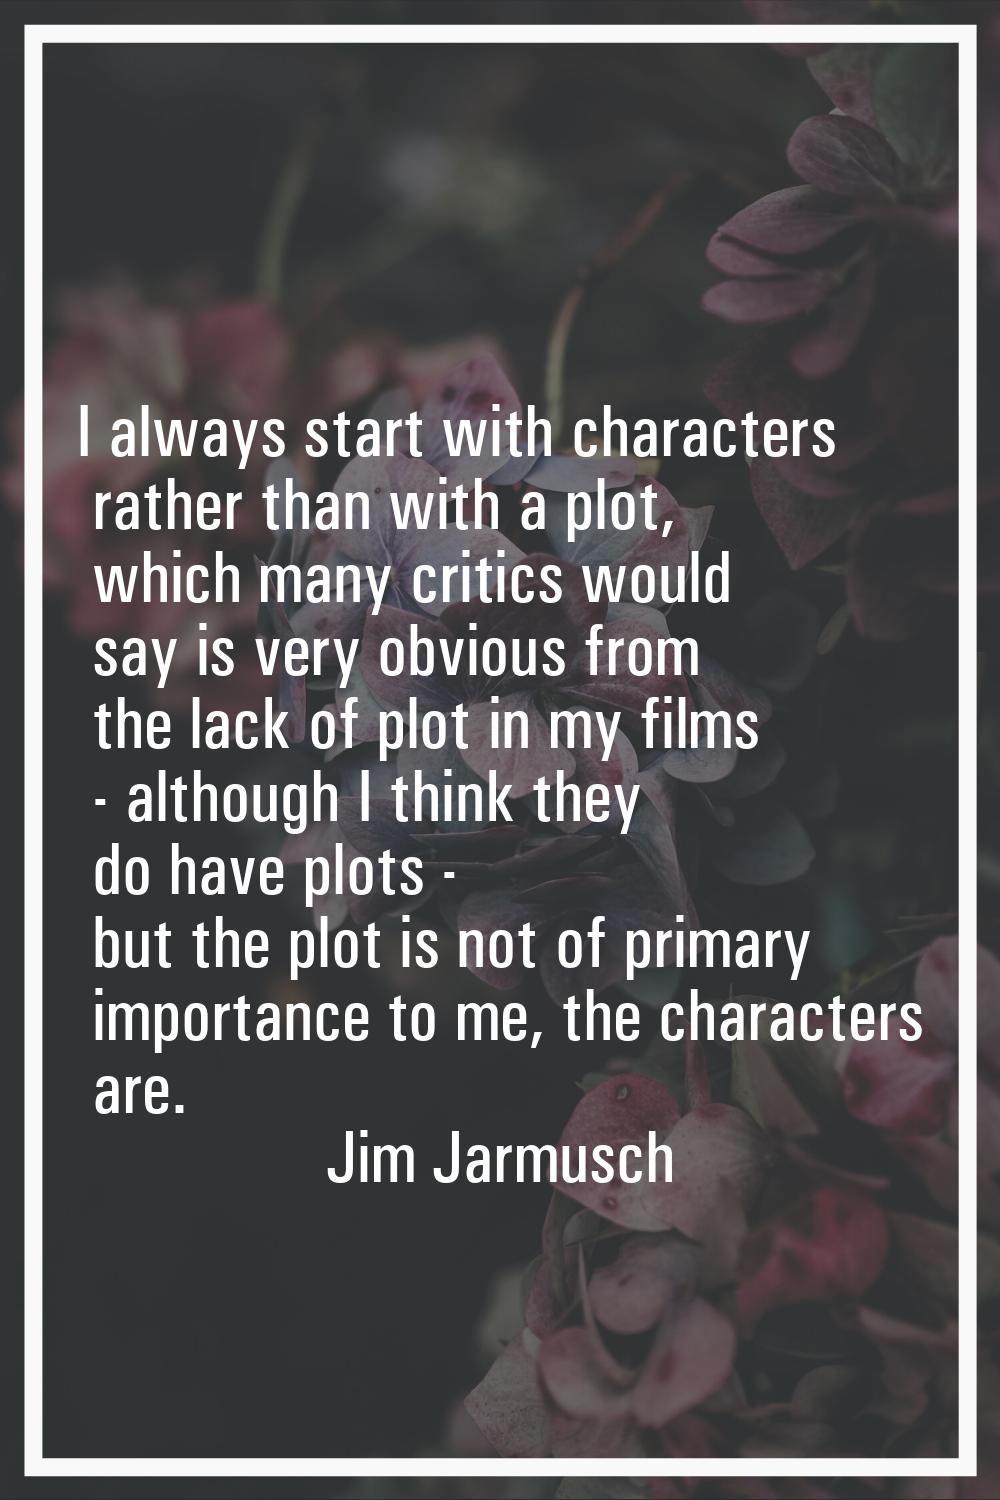 I always start with characters rather than with a plot, which many critics would say is very obviou